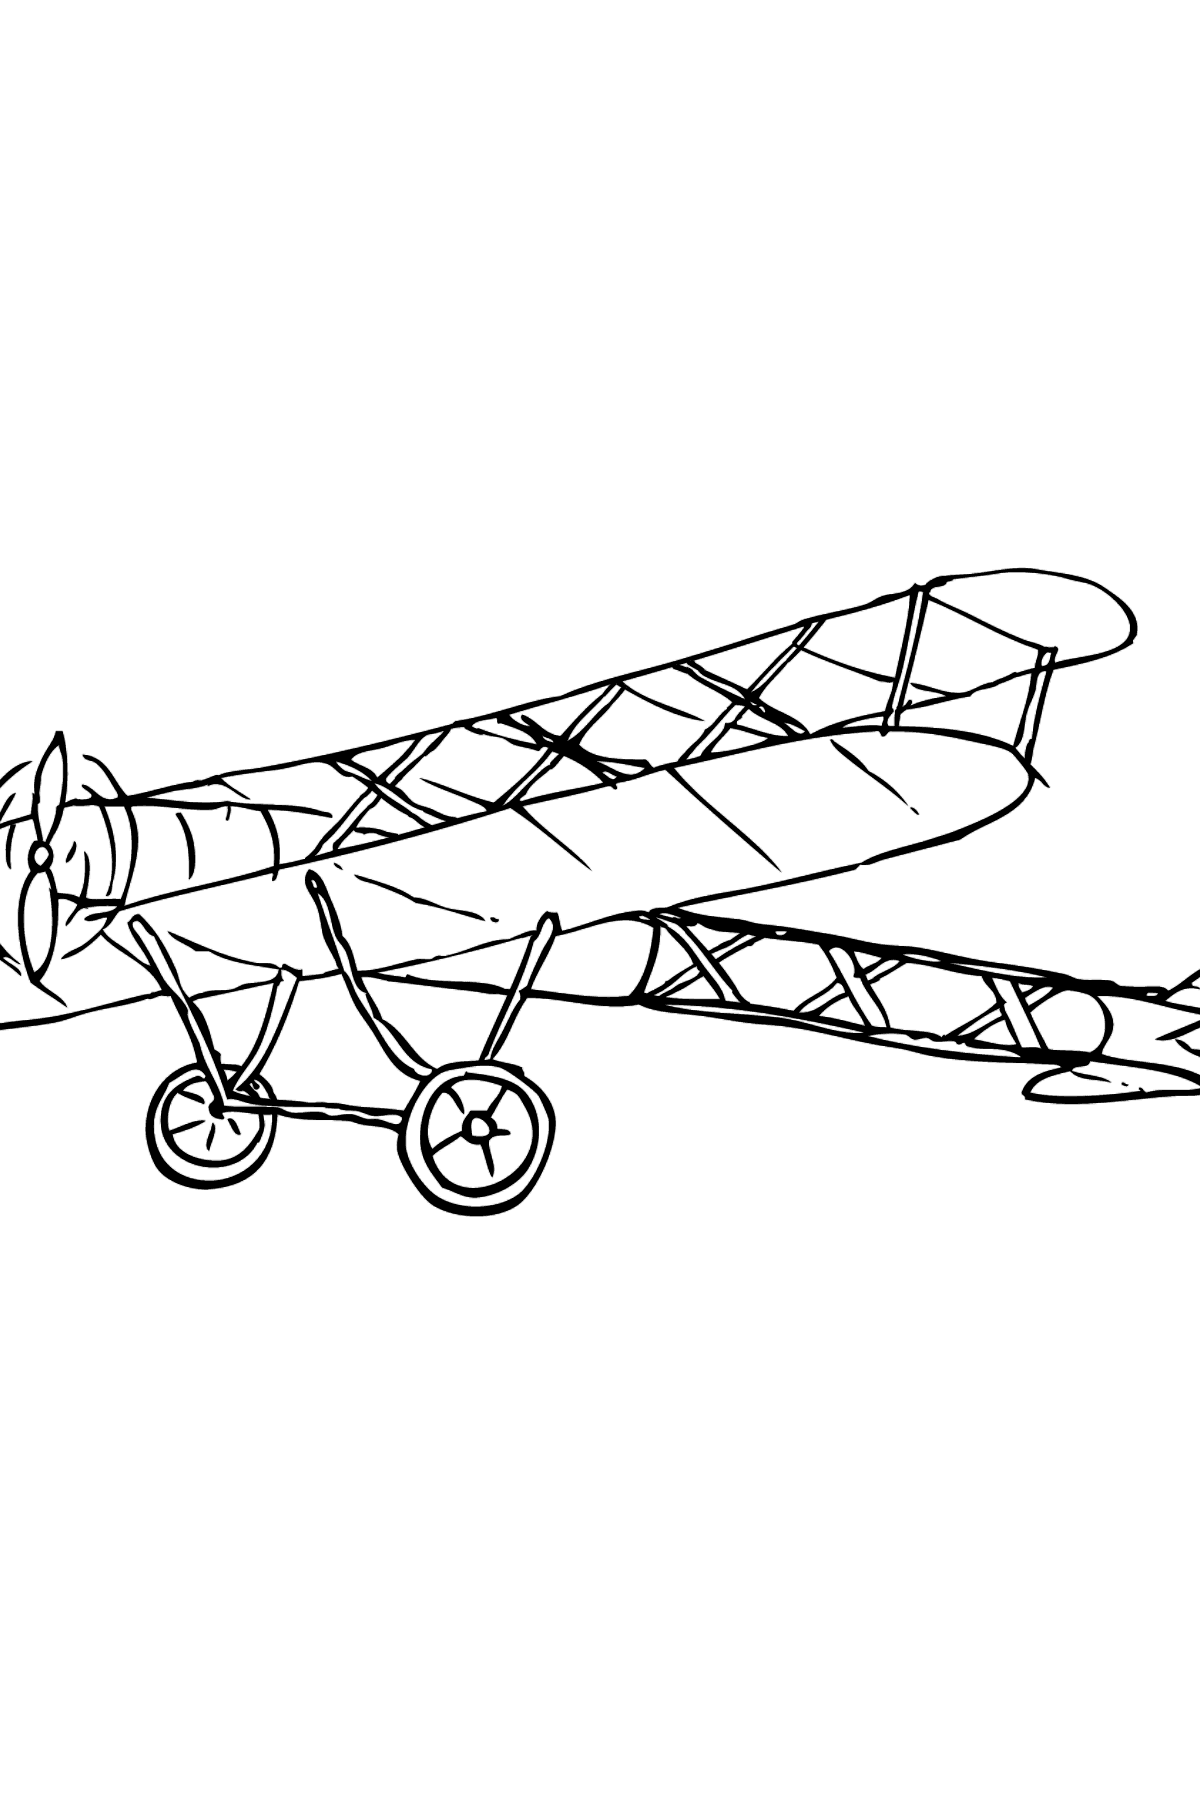 Military Biplane Coloring Page - Coloring Pages for Kids